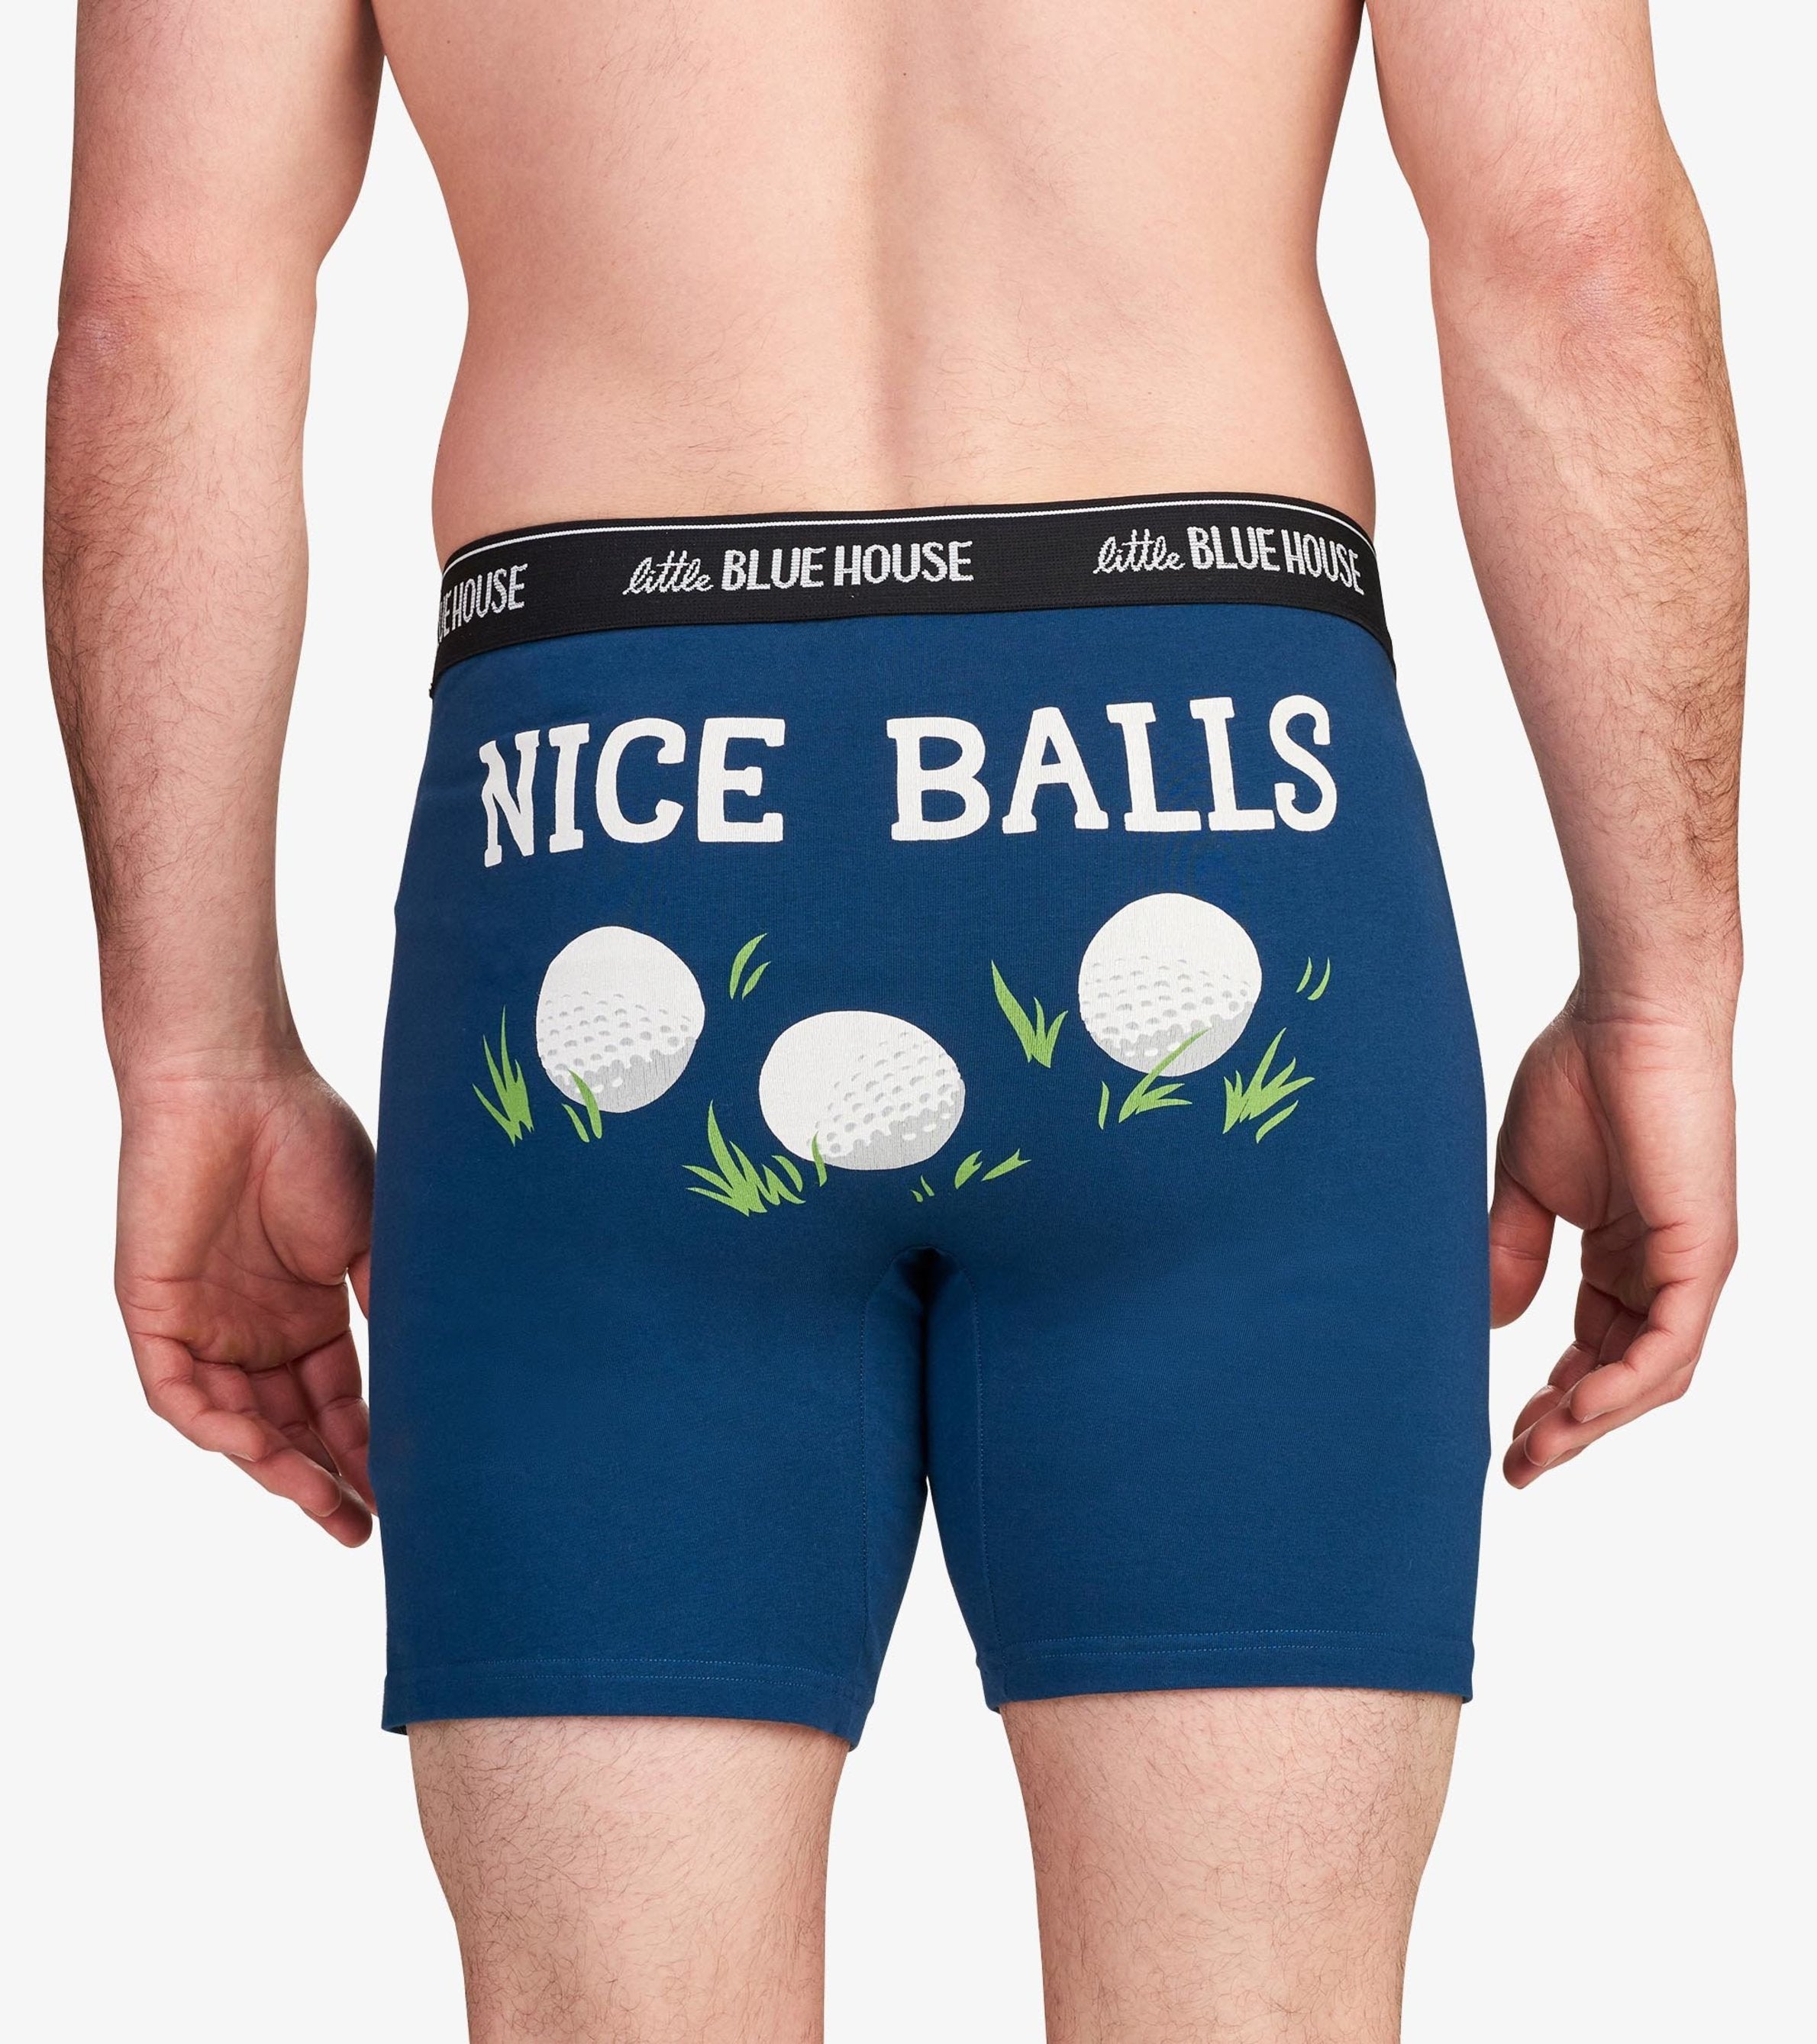 NICE BALLS BOXERS – Oh Canada WPG